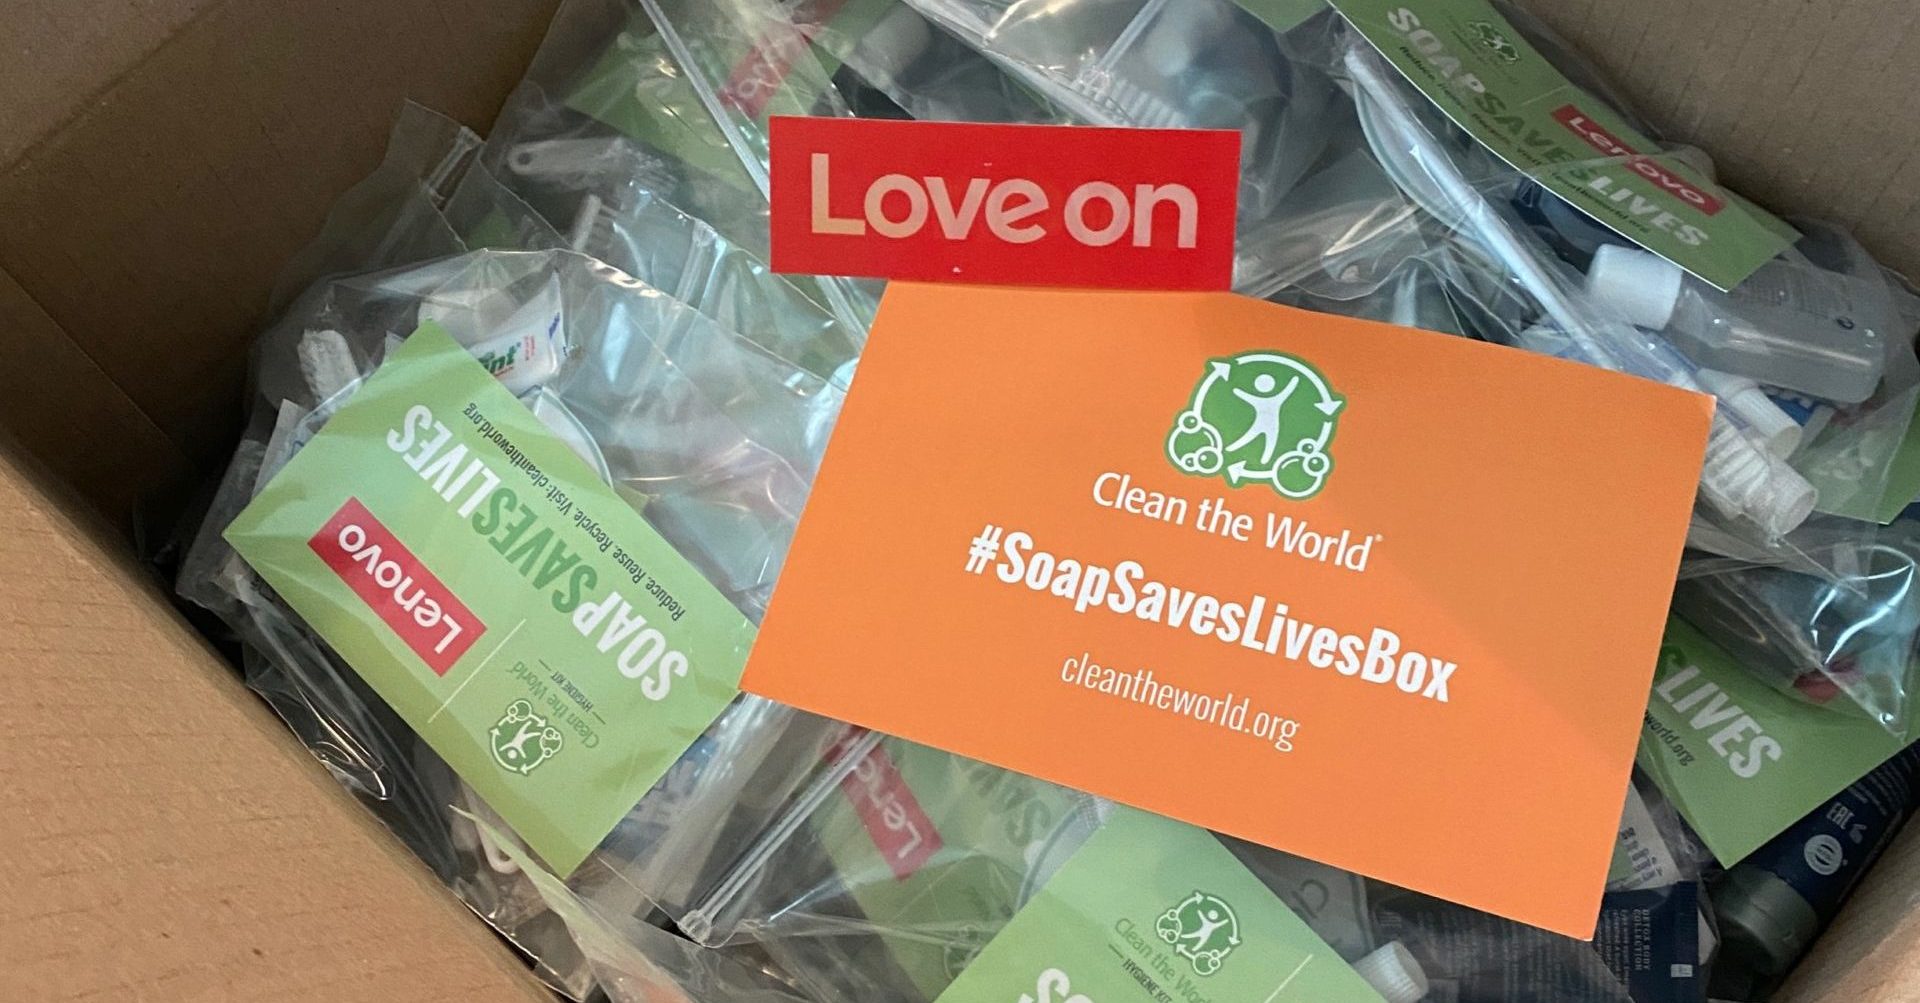 A Soap Saves Lives Box full of Hygiene Kit. On top of the hygiene kits is a notecard that says "Love On"